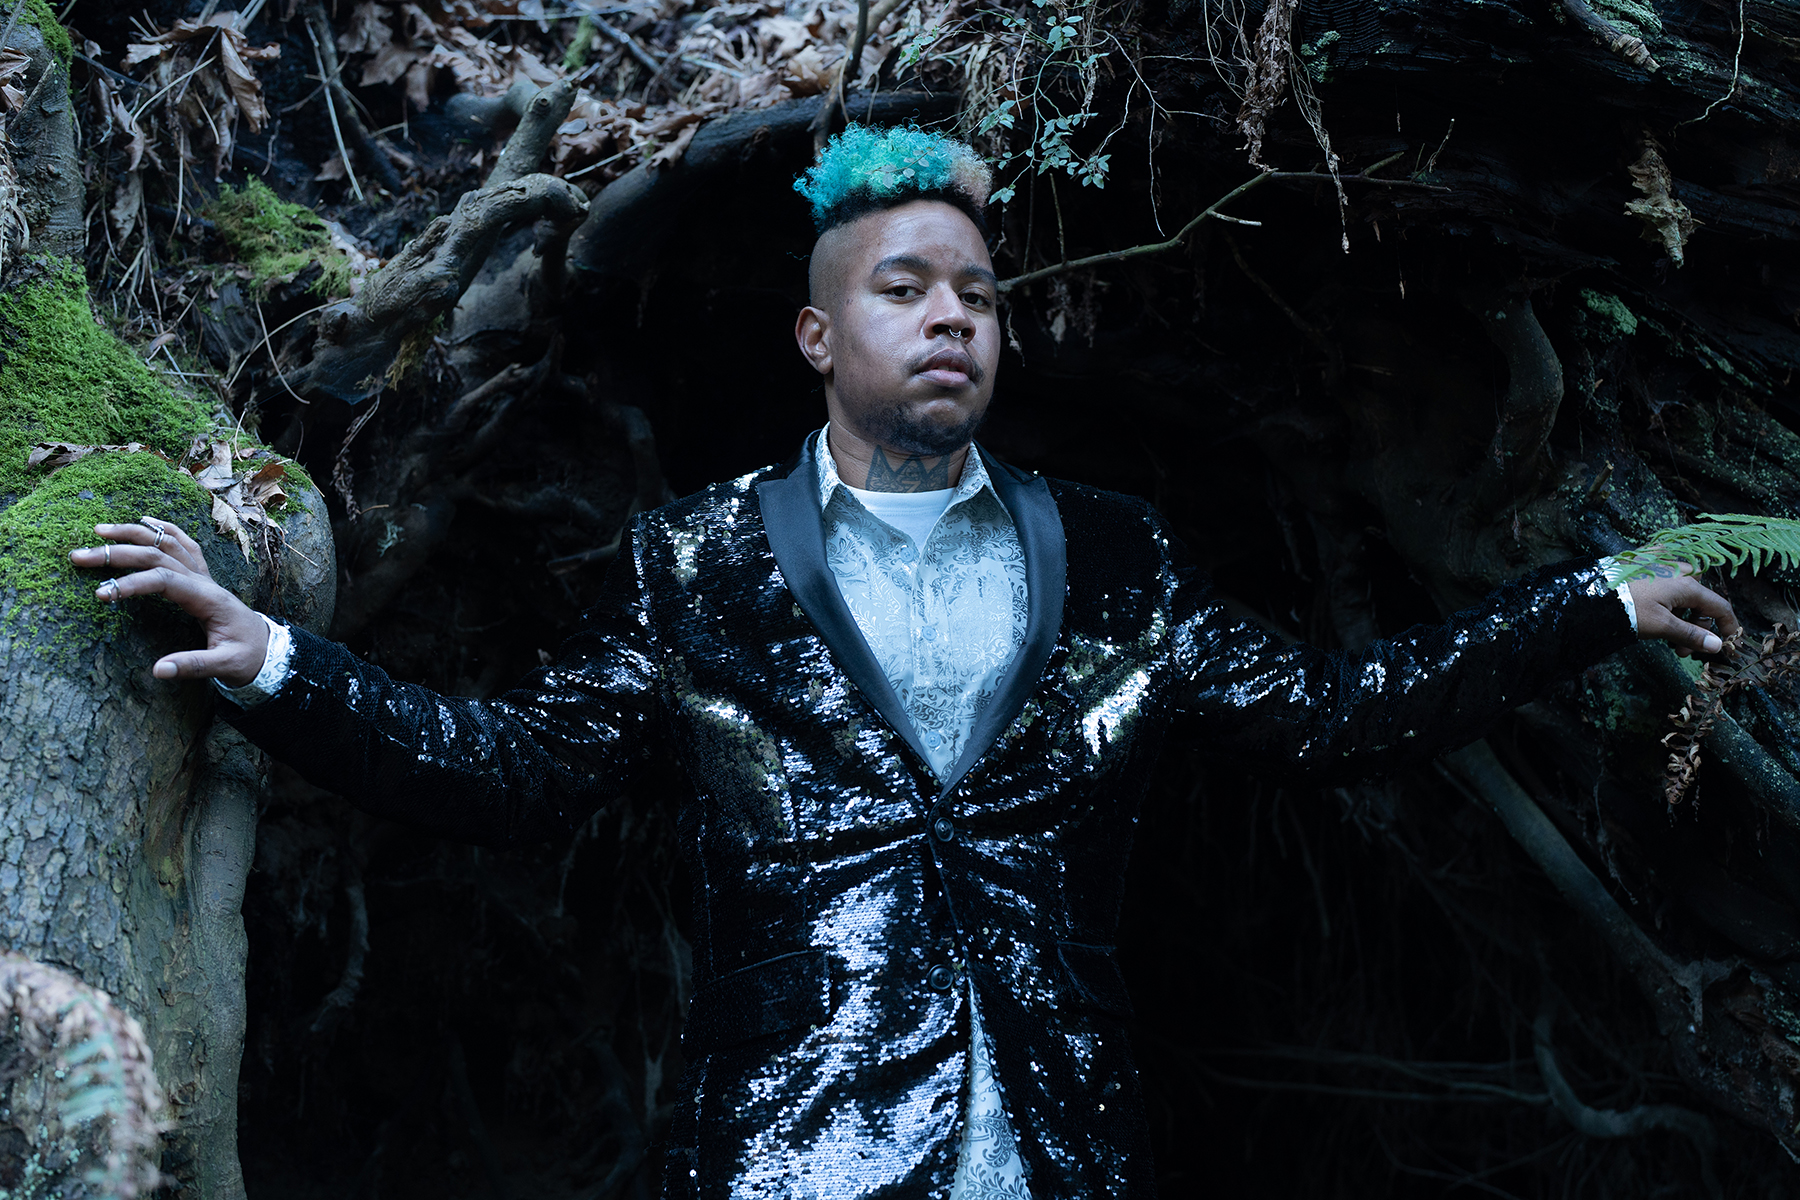 A photo of a Black man outdoors, with arms outstretched to reach each side of a cave-like hole behind him. His hair is dyed a blue-green and he is wearing a shiny black jacket.